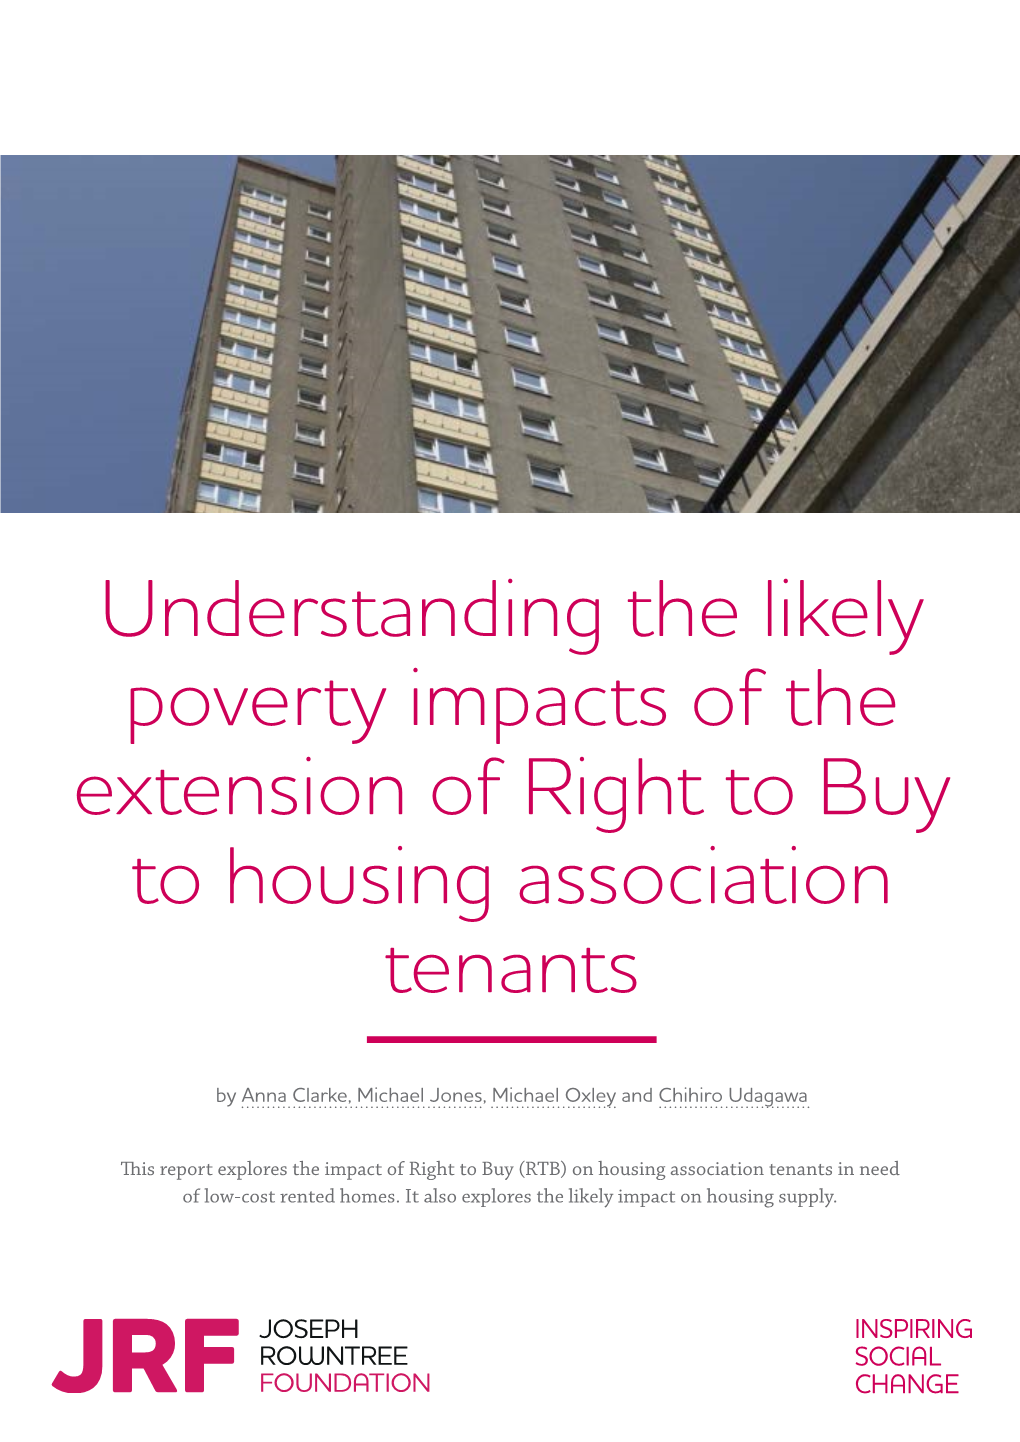 Understanding the Likely Poverty Impacts of the Extension of Right to Buy to Housing Association Tenants